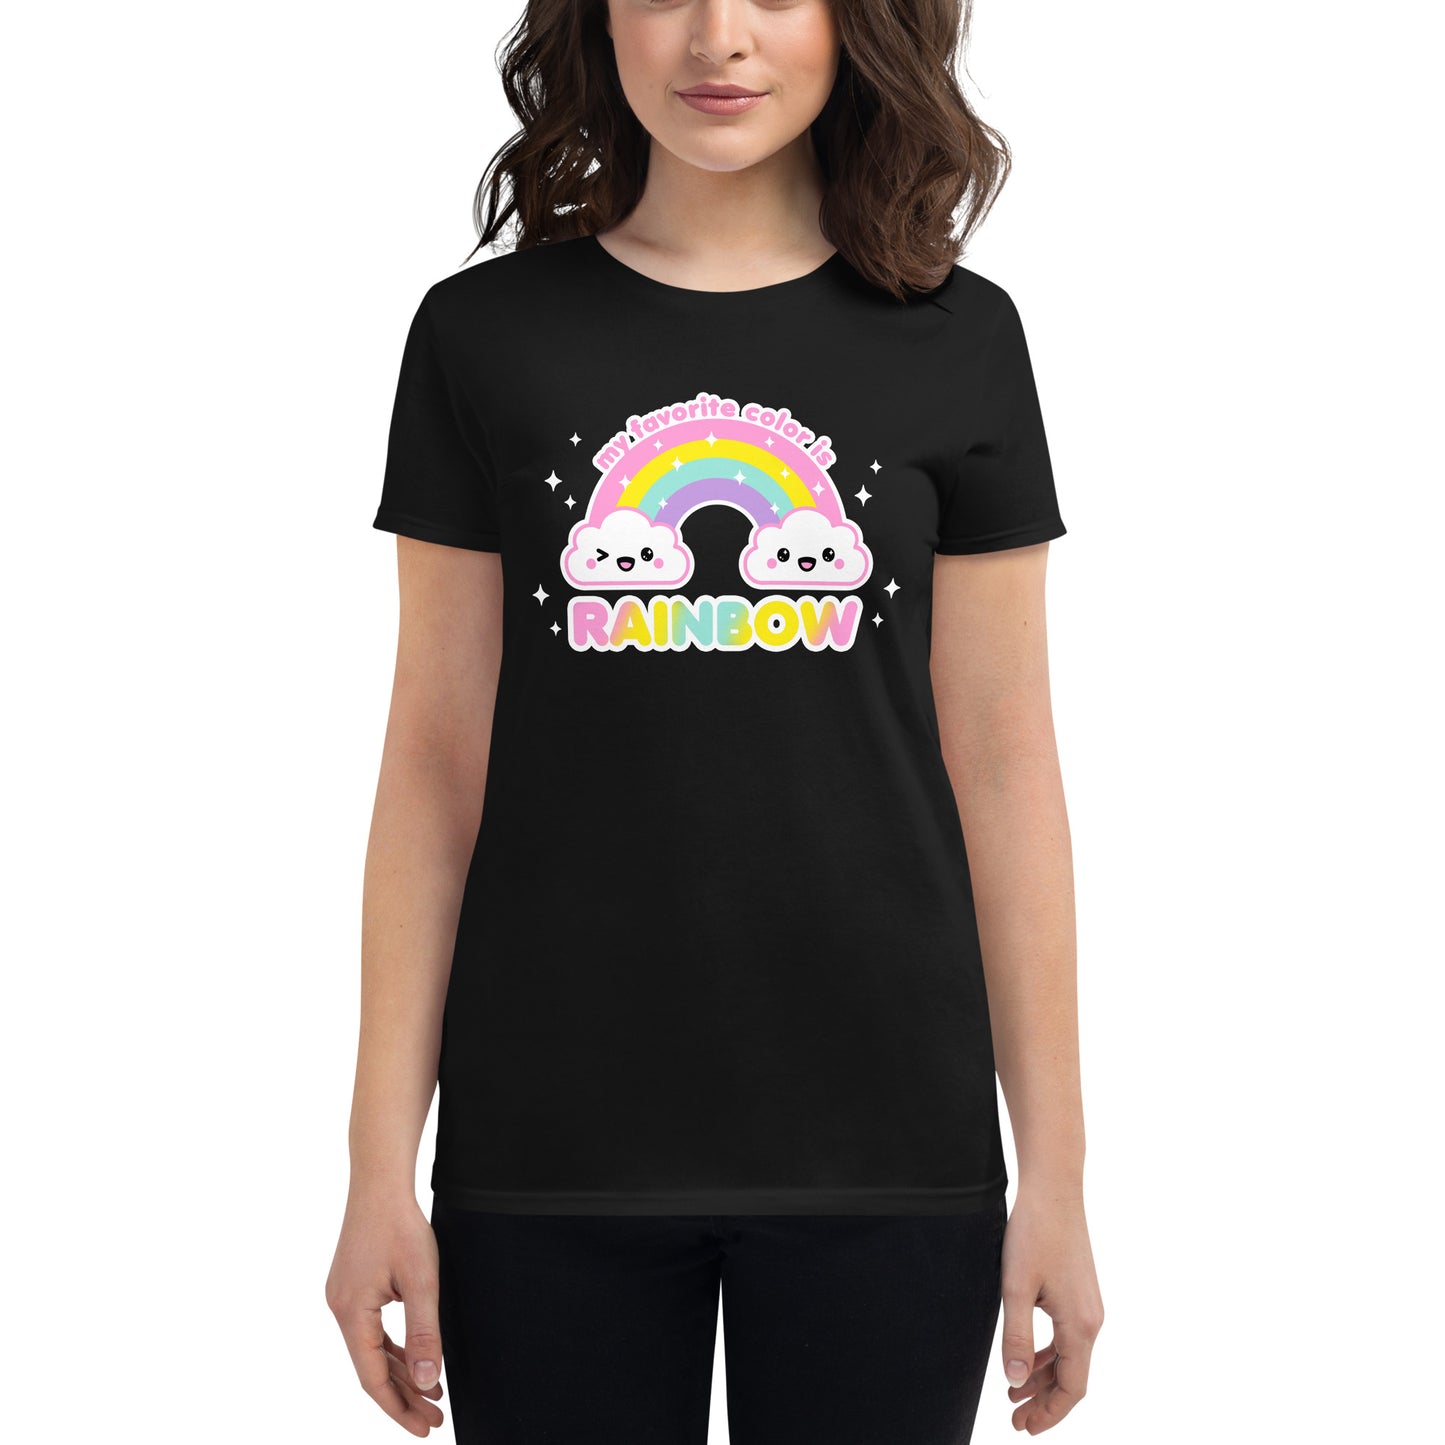 My Favorite Color Is Rainbow Women's T-shirt